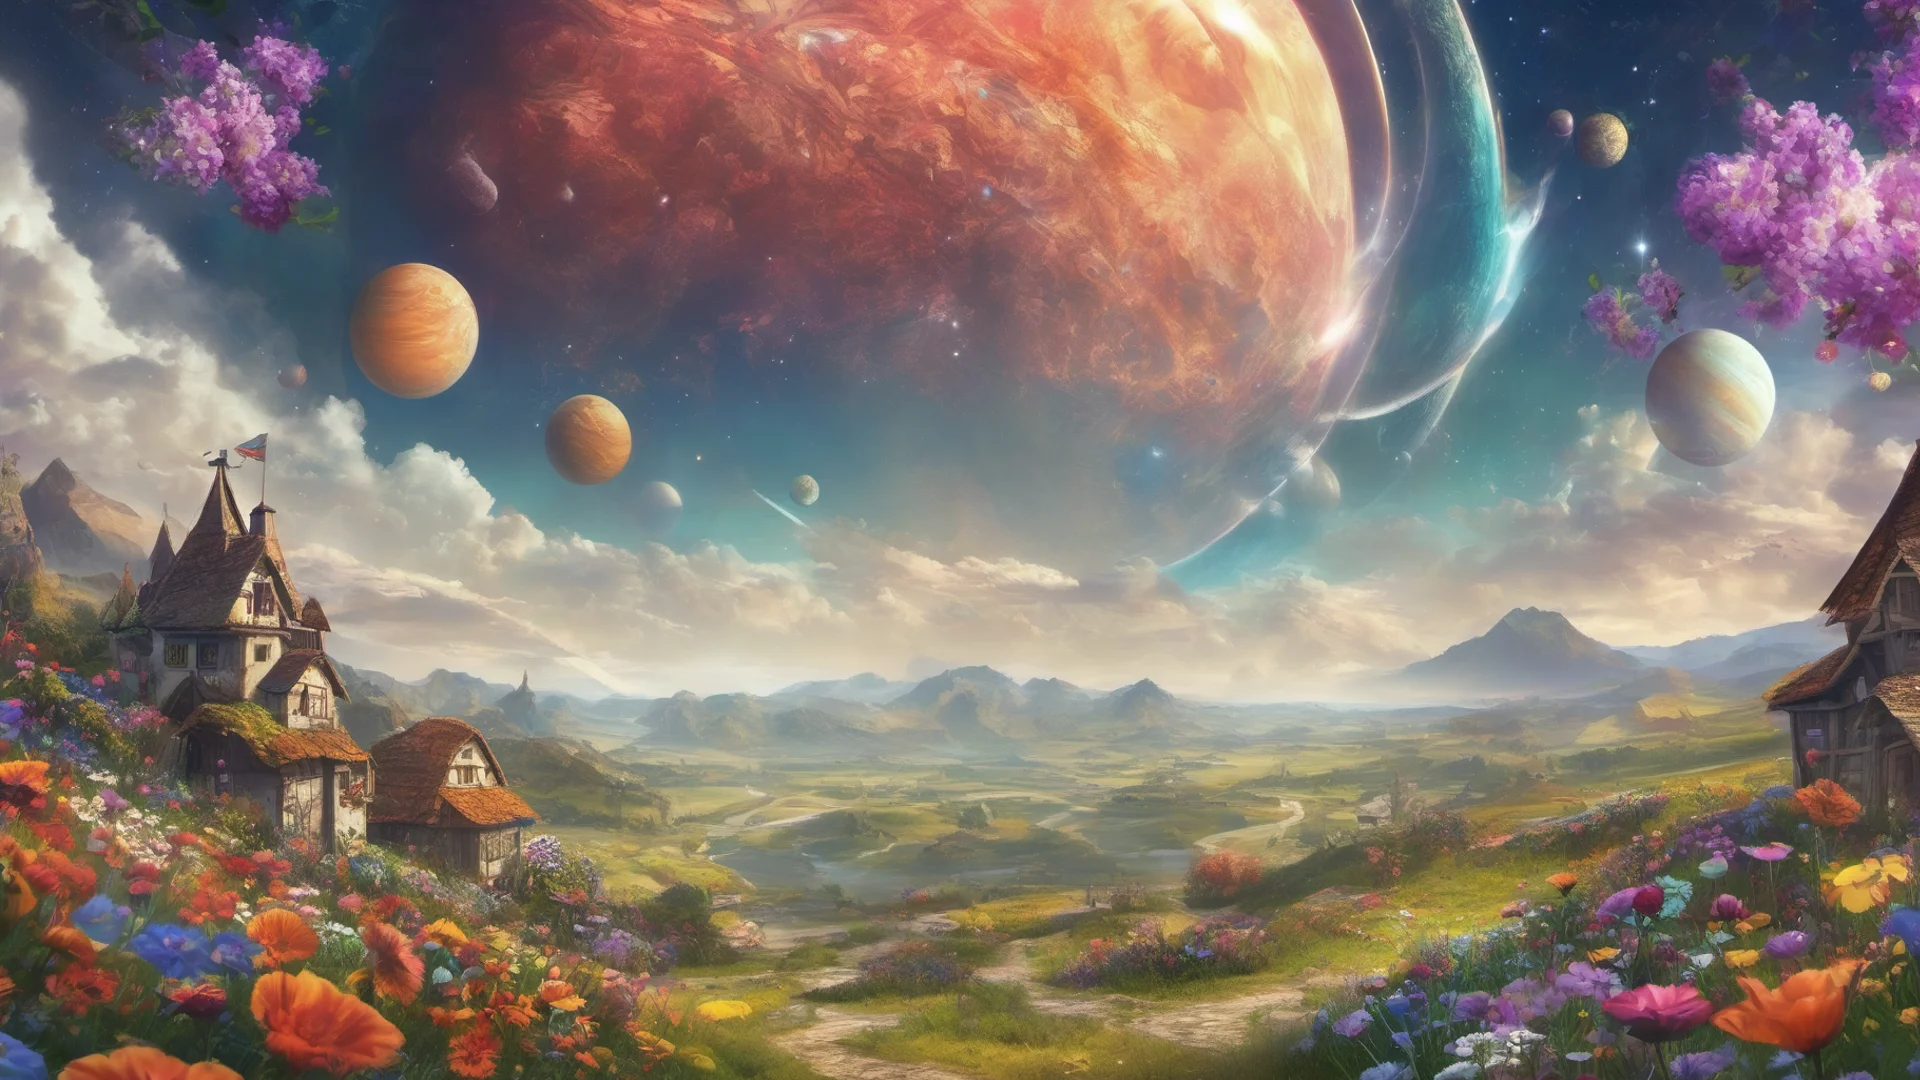 epic fantasy background colorful flower meadows village covered in flowers two saturn ringed planets overhead wide